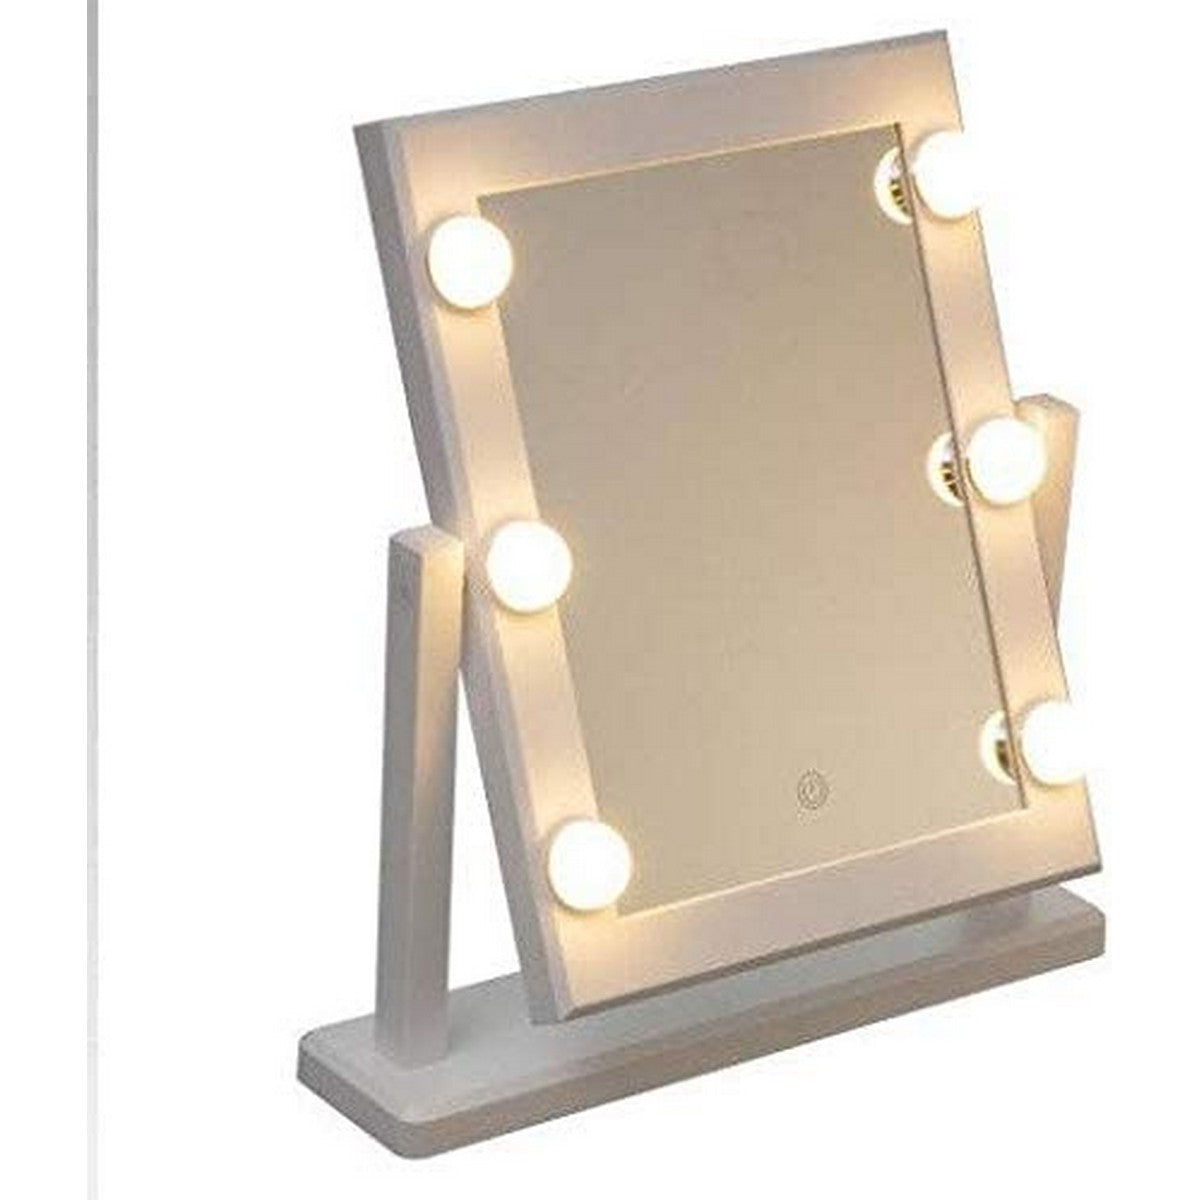 Tabletop Touch LED Mirror 5five Hollywood White 37 x 9 x 40,5 cm-1